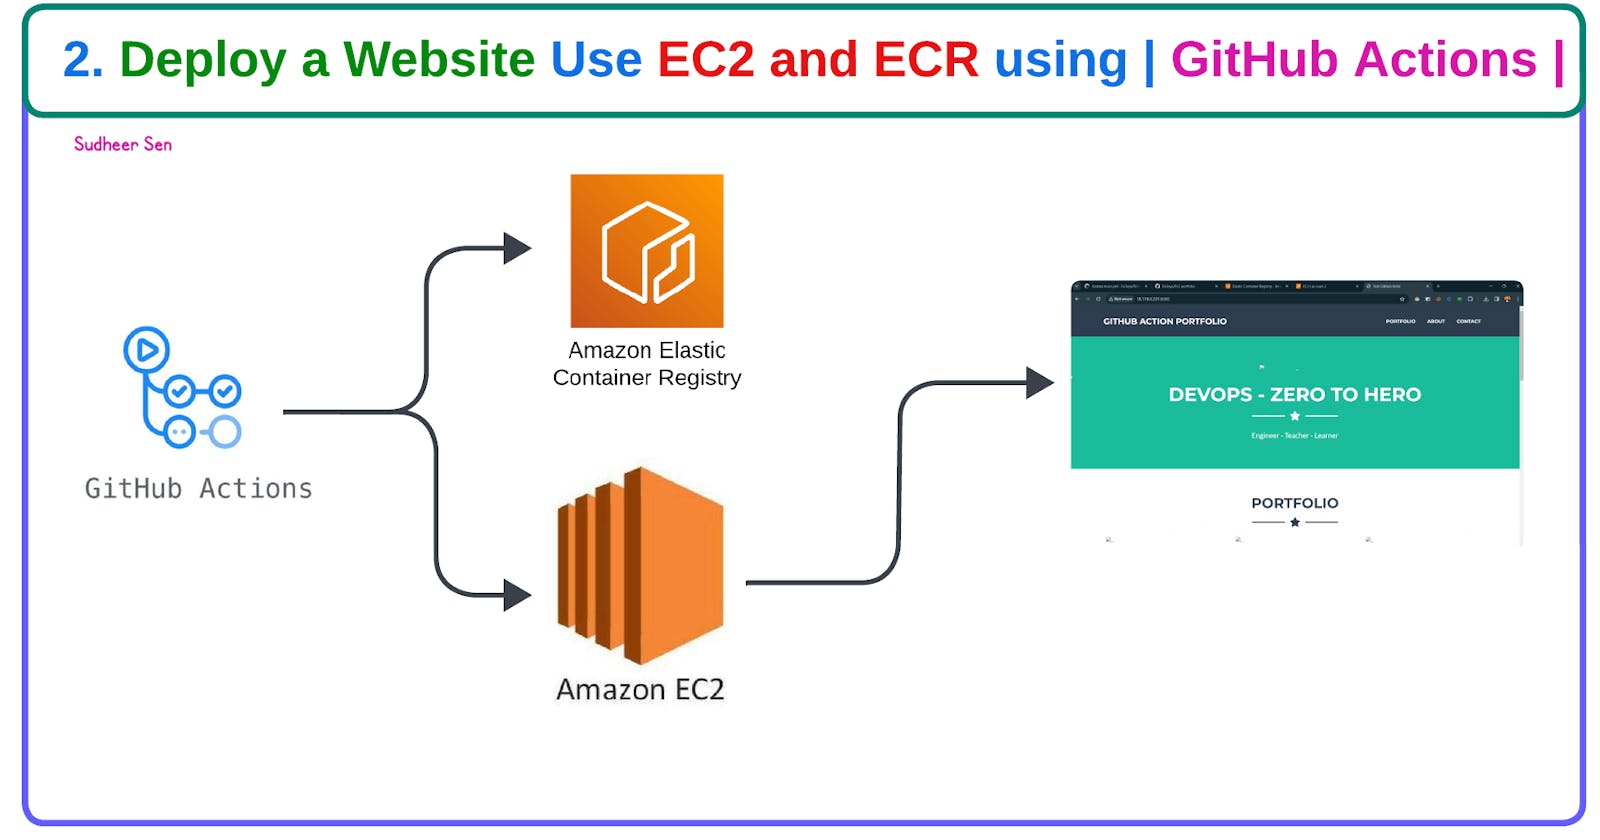 2. Deploy a Website Use EC2 and ECR using GitHub Actions